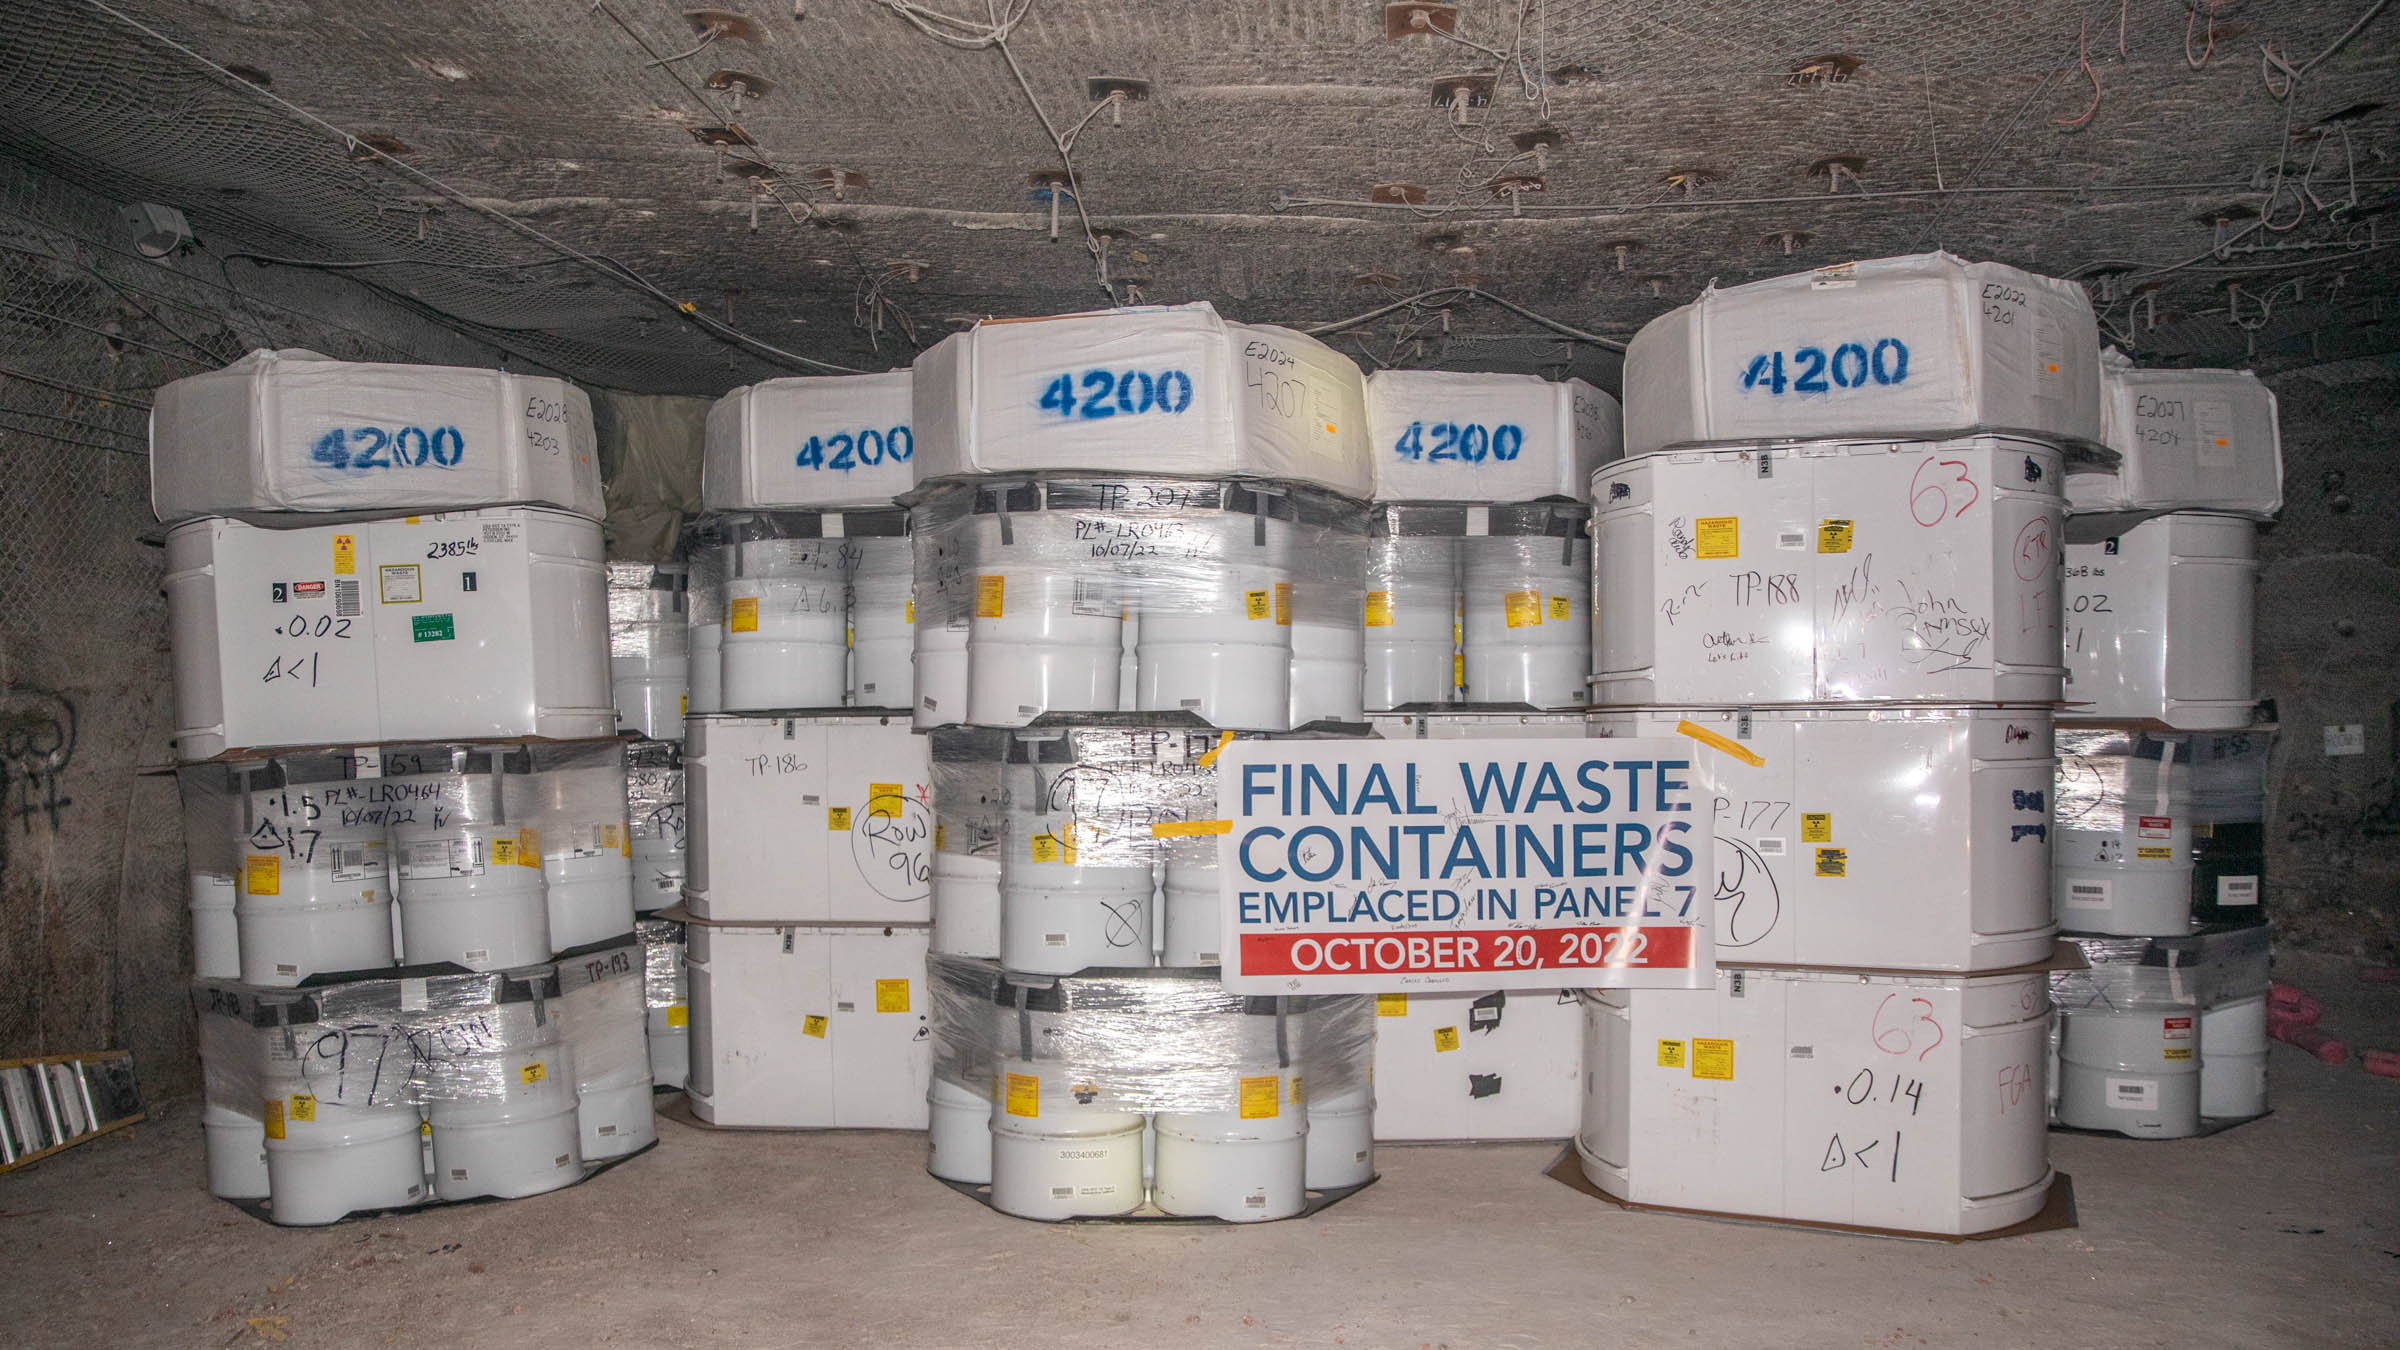 Image of final waste containers